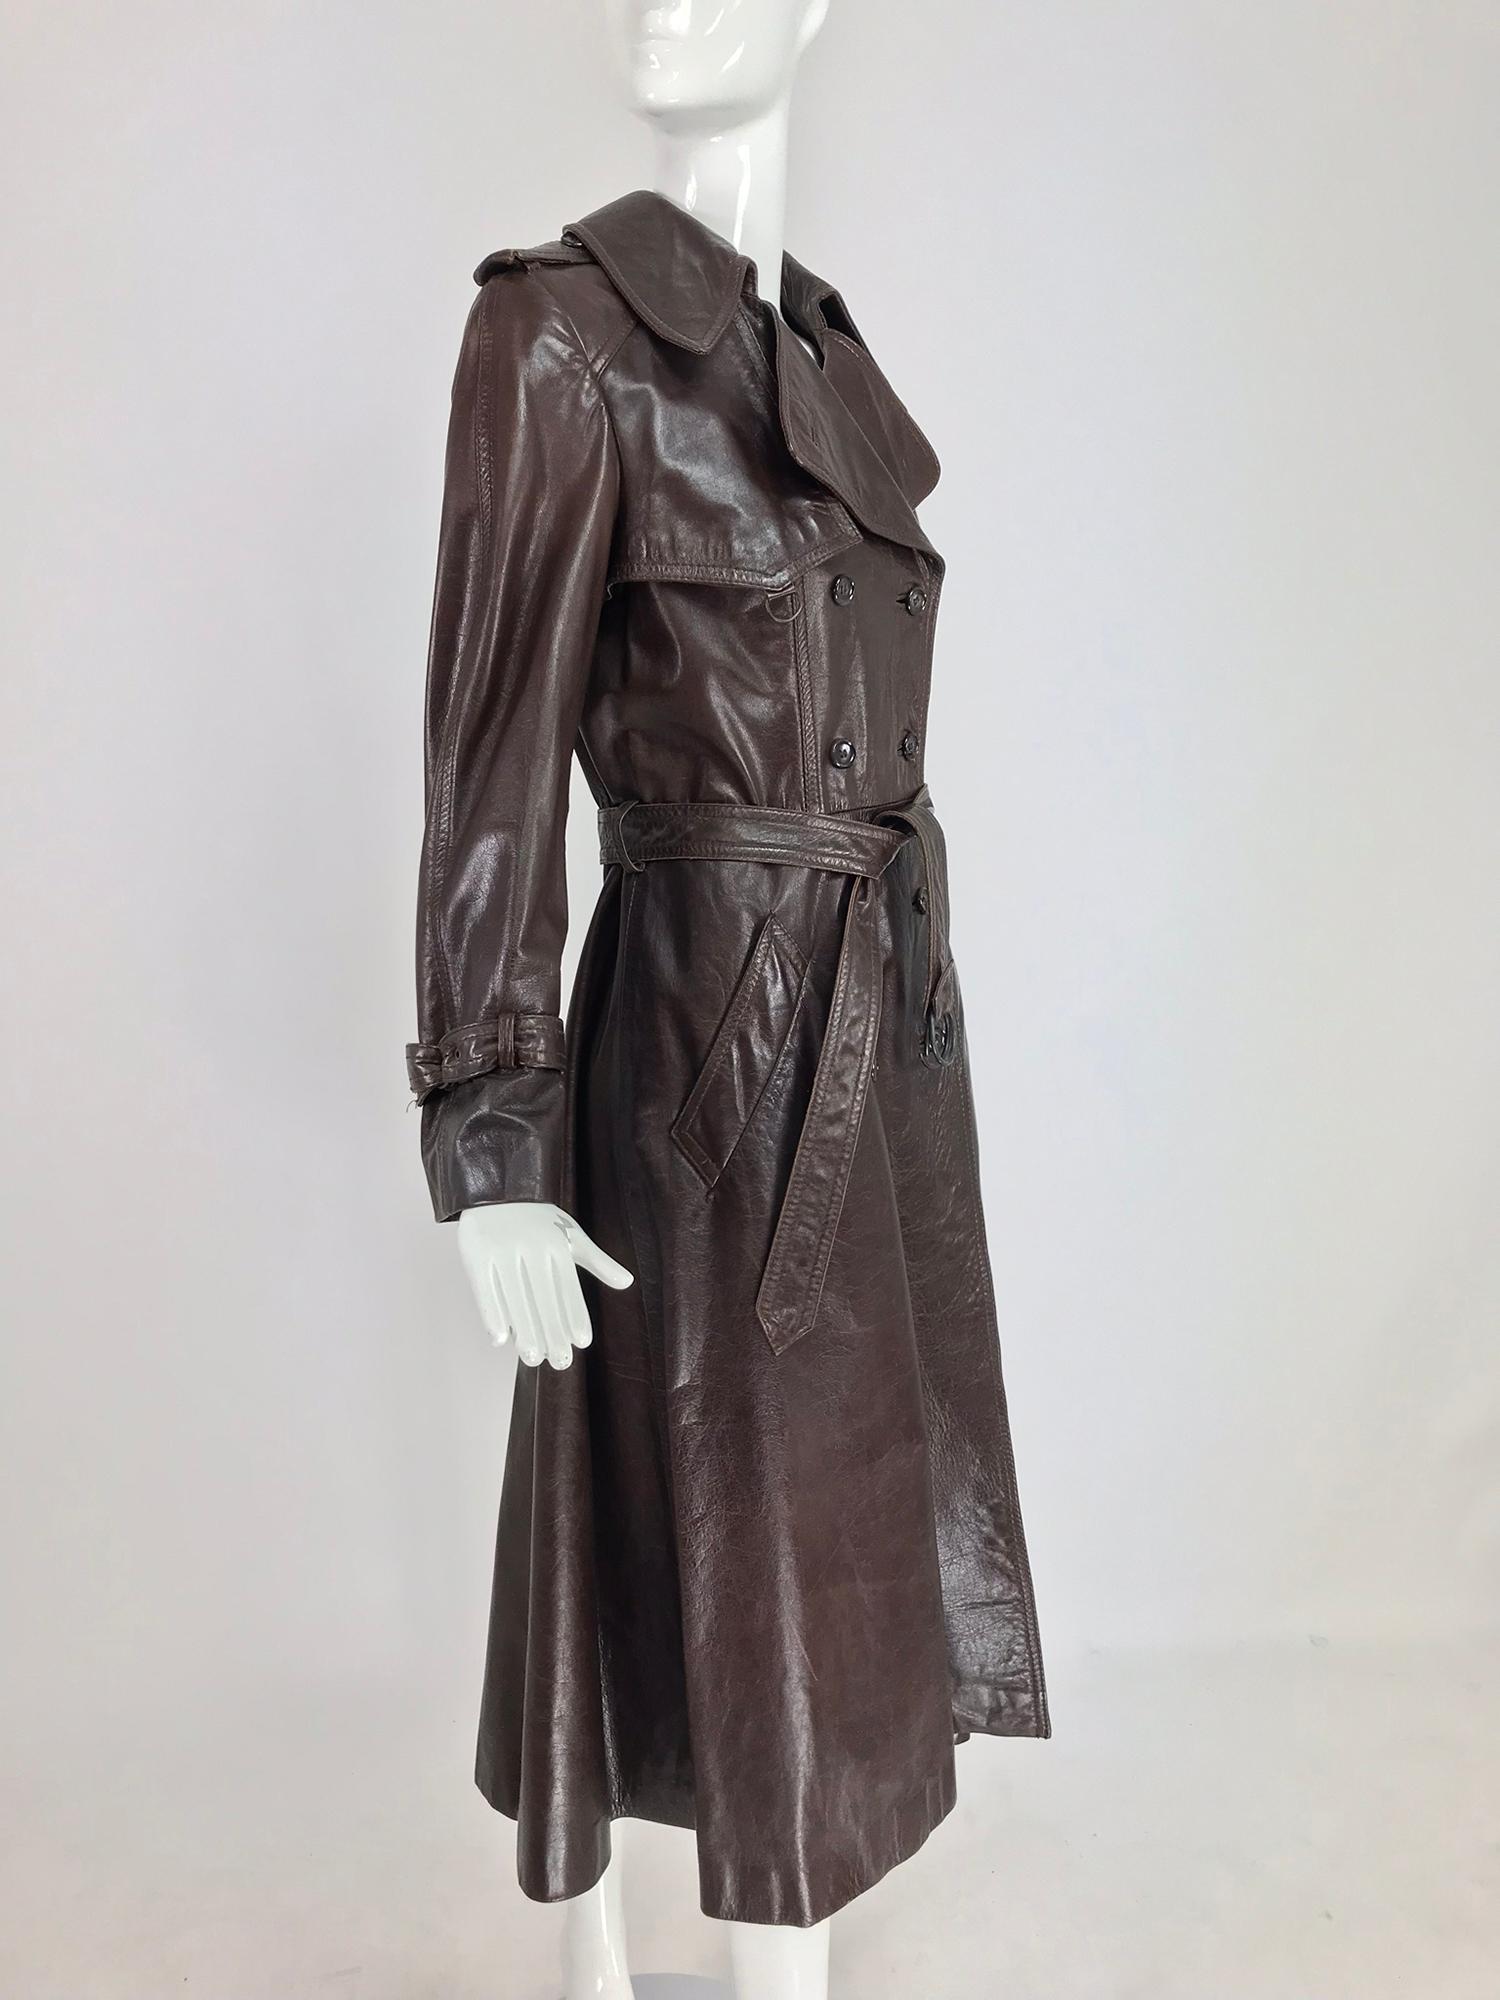 Anne Klein Chocolate brown leather trench coat 1970s 6